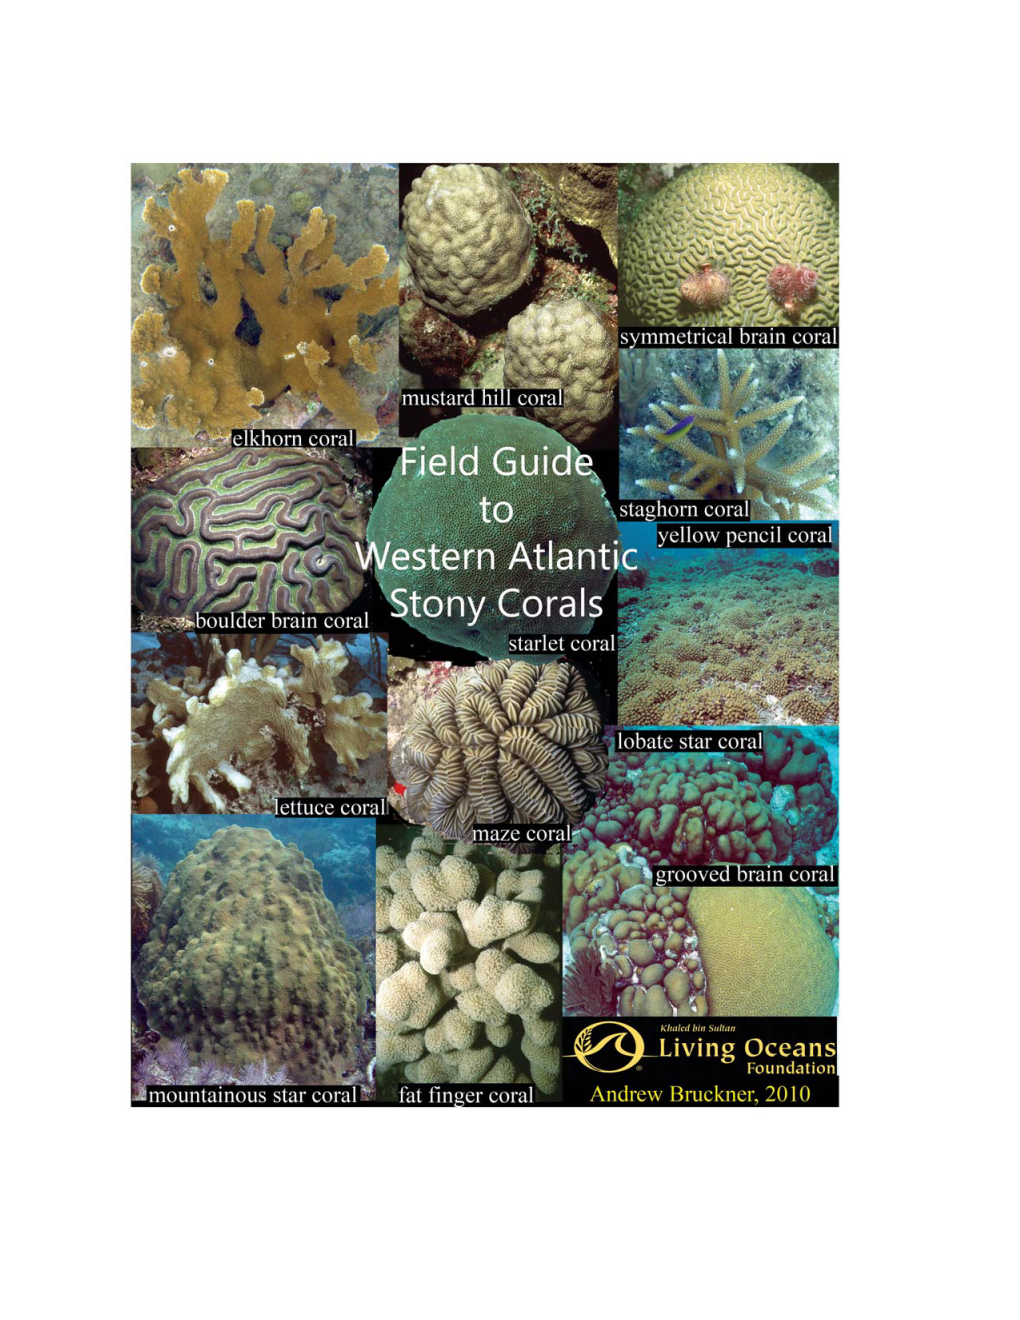 Field Guide to Western Atlantic Stony Corals